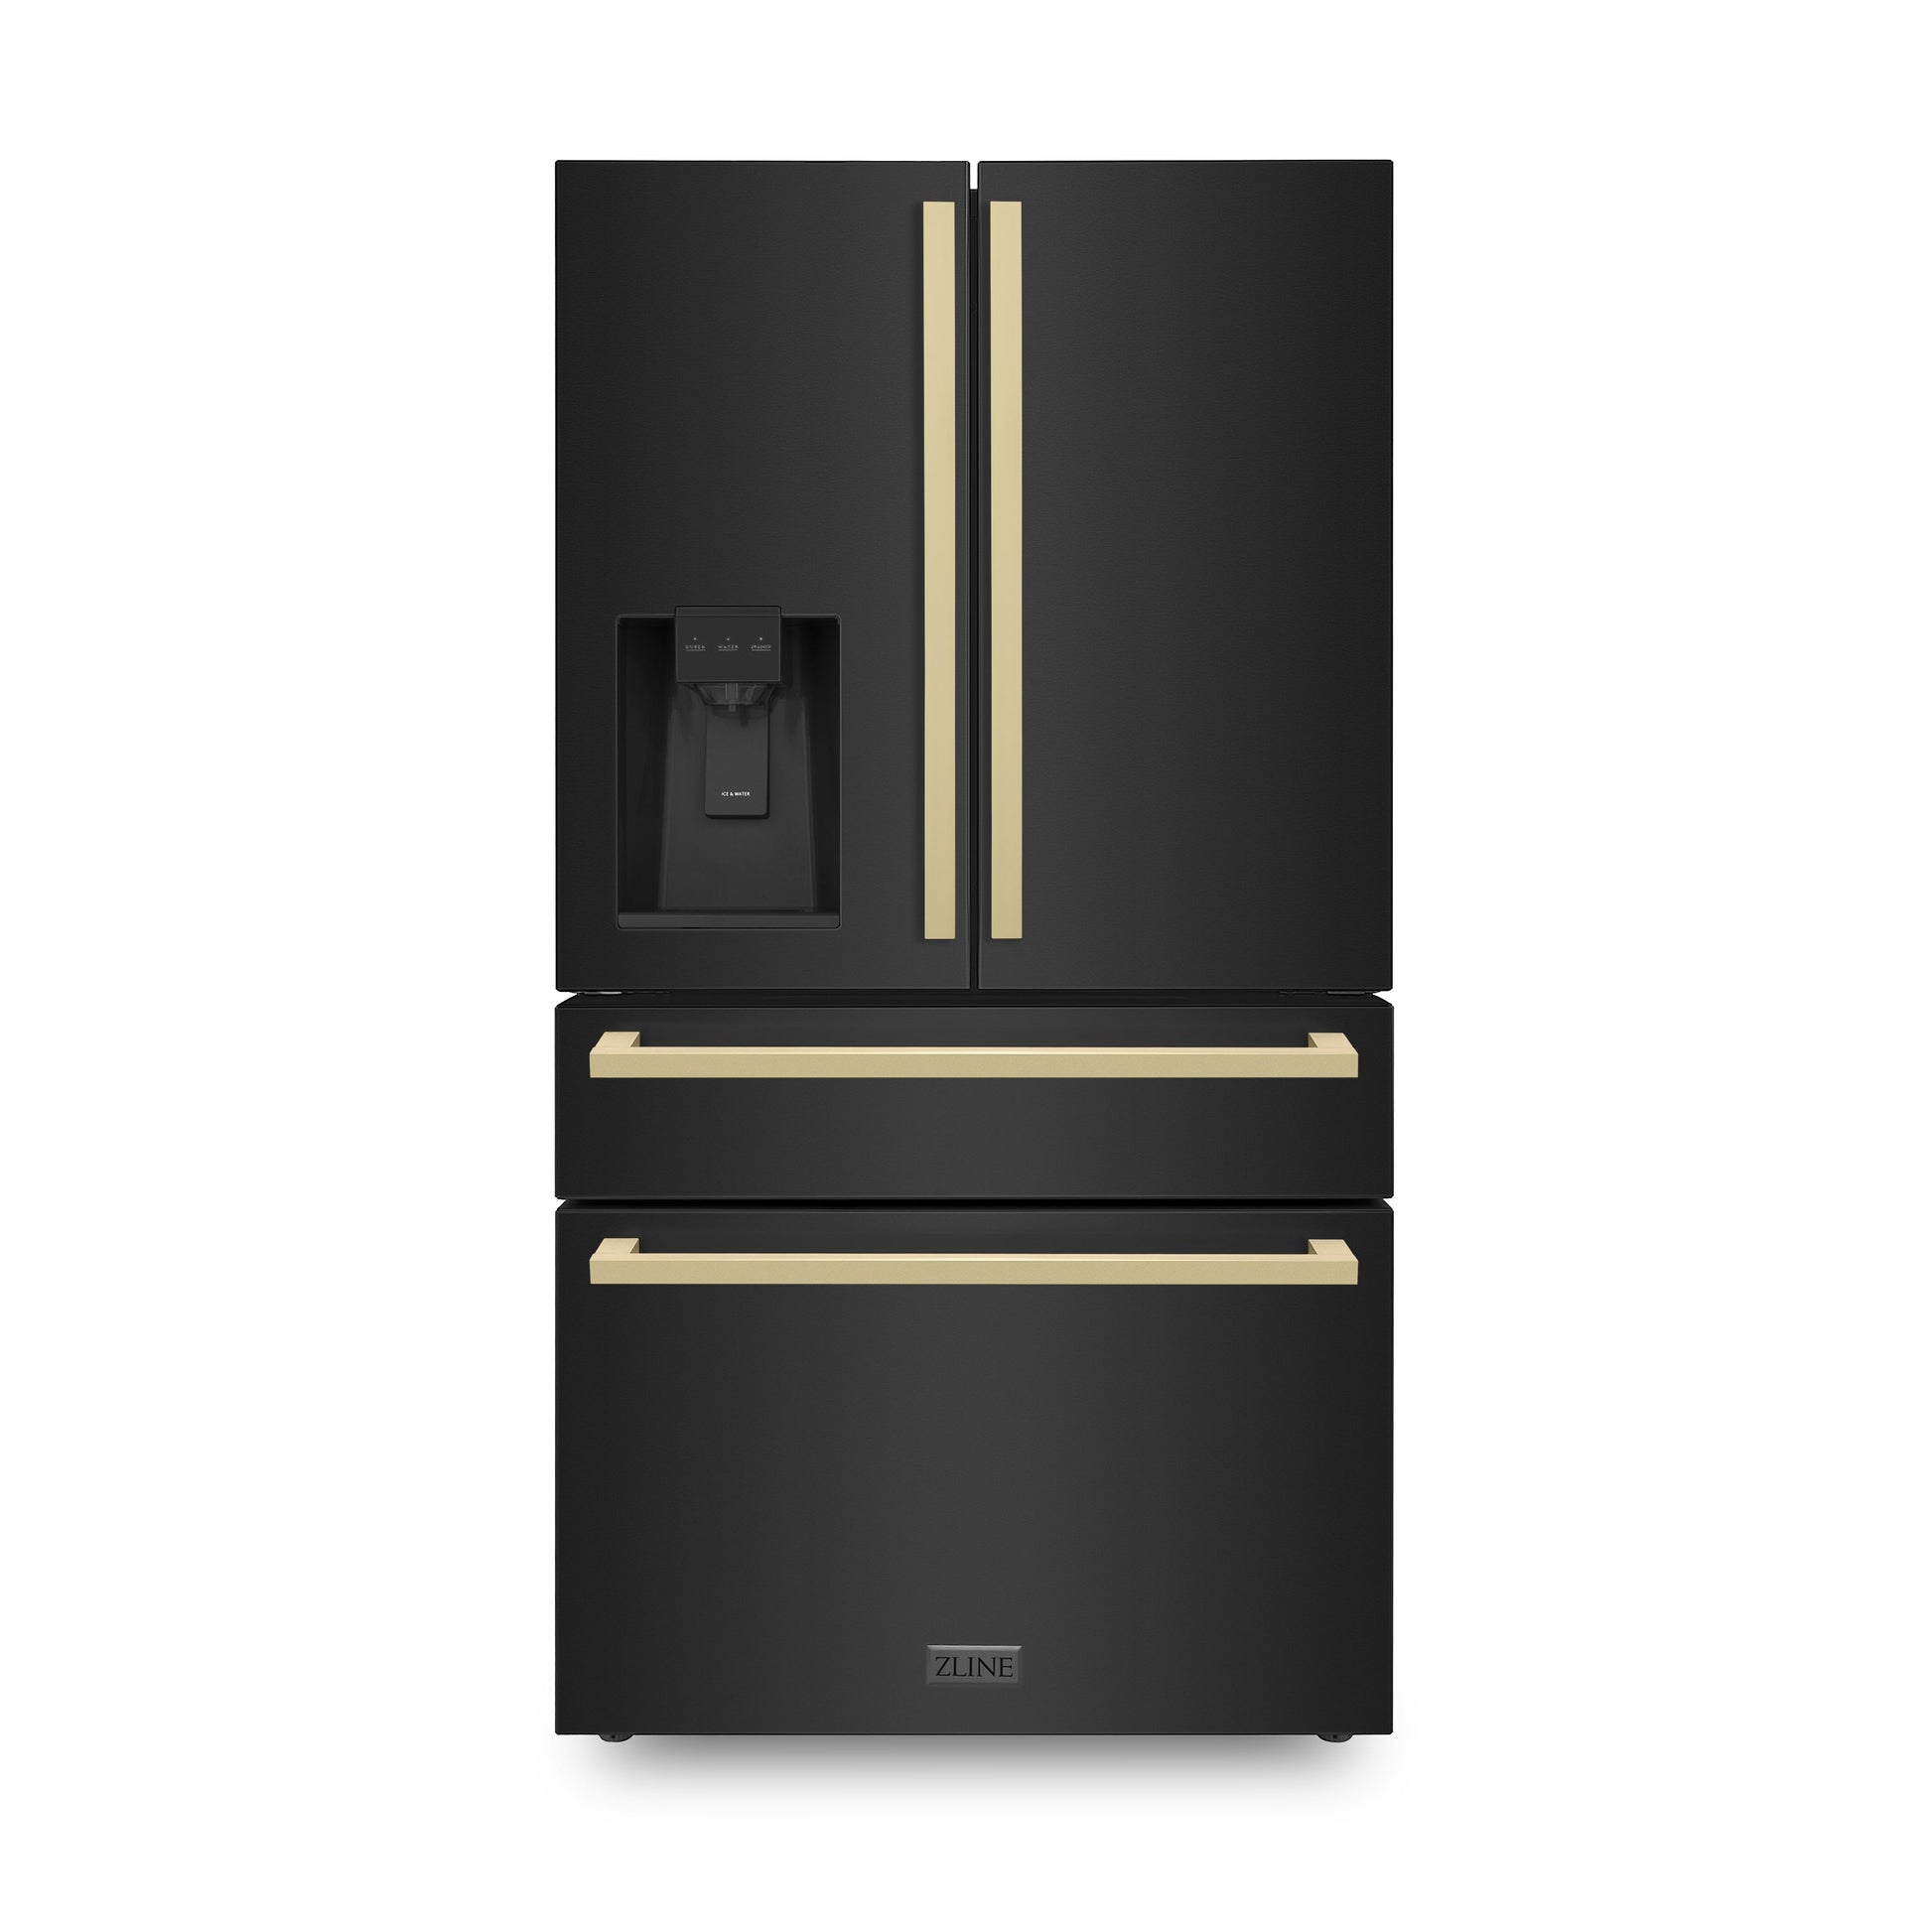 ZLINE Autograph Edition 36 in. 21.6 cu. ft 4-Door French Door Refrigerator with Water and Ice Dispenser in Black Stainless Steel with Champagne Bronze Square Handles (RFMZ-W36-BS-FCB) front.